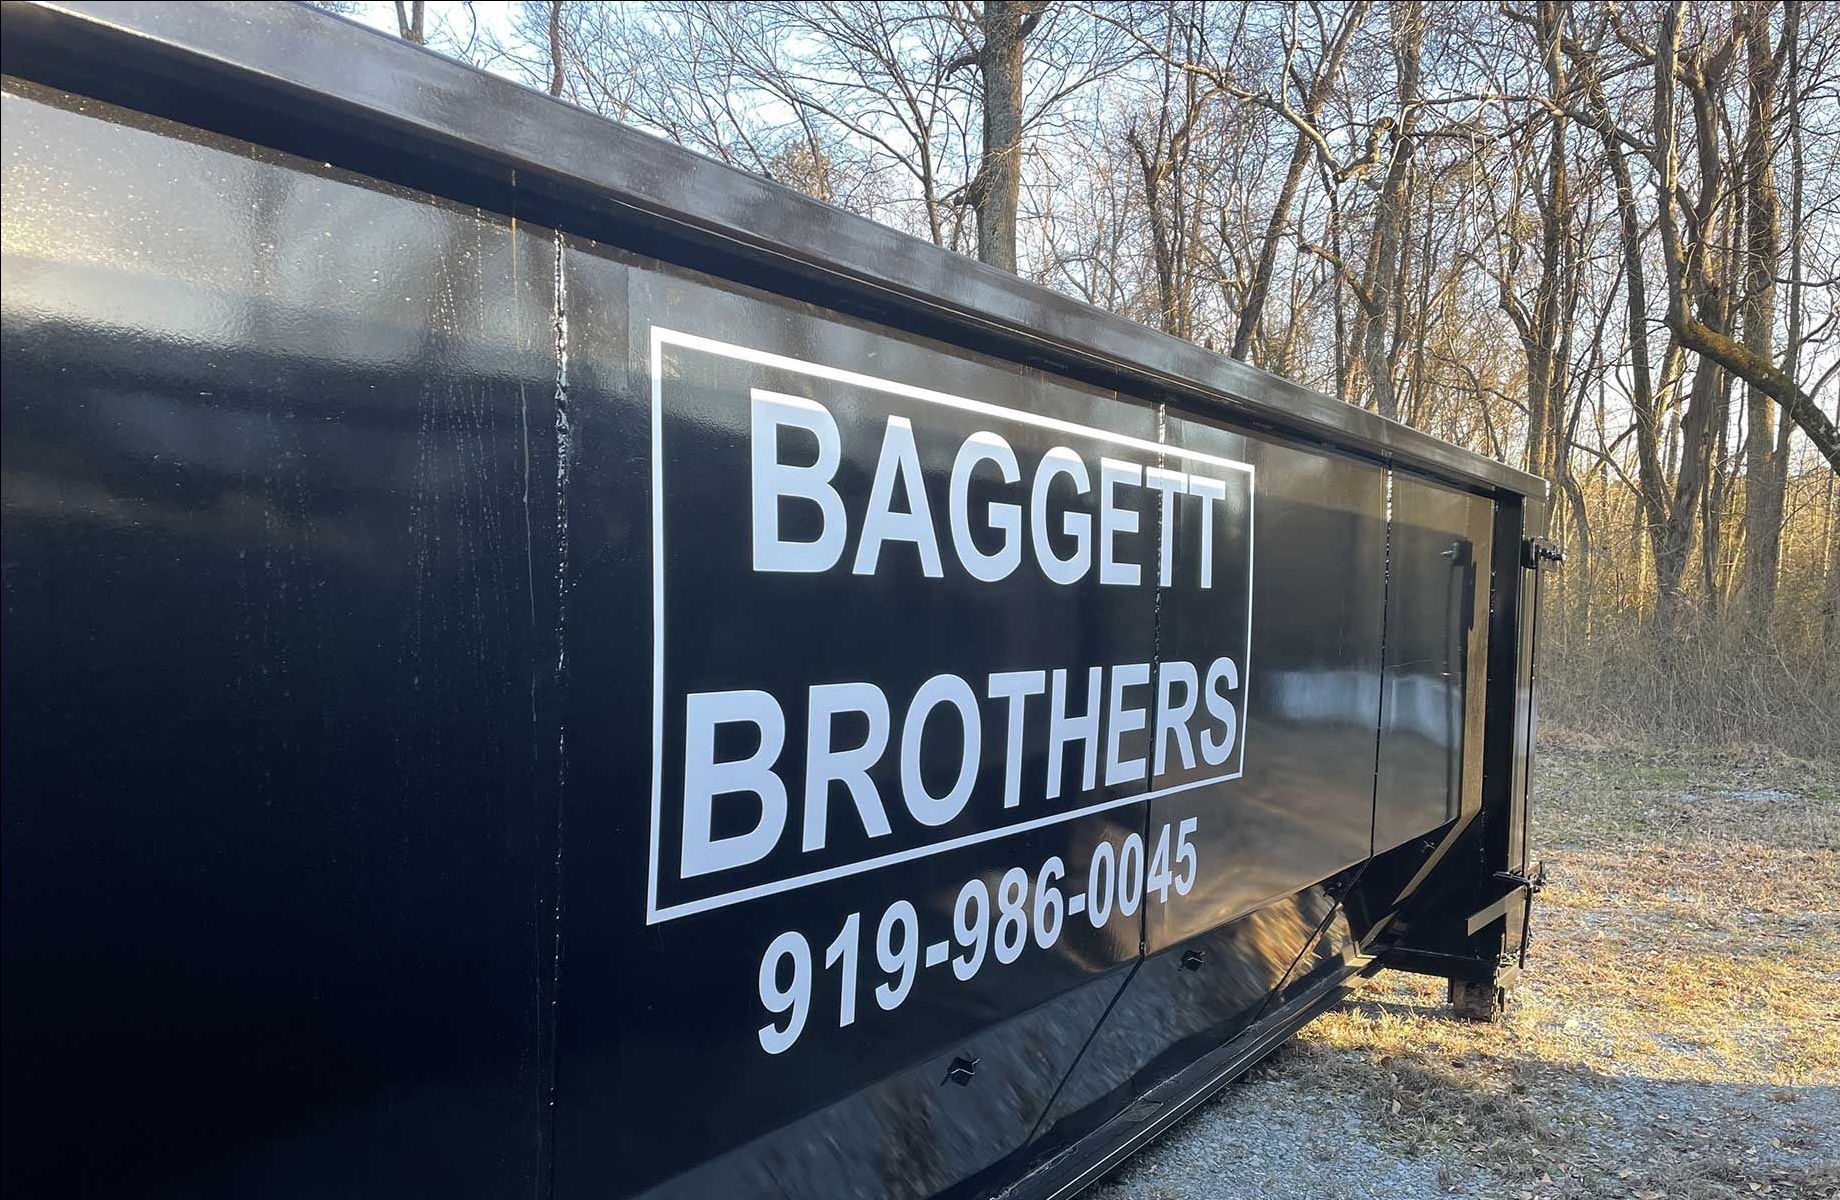 BAGGETT BROTHERS CONTRACTING